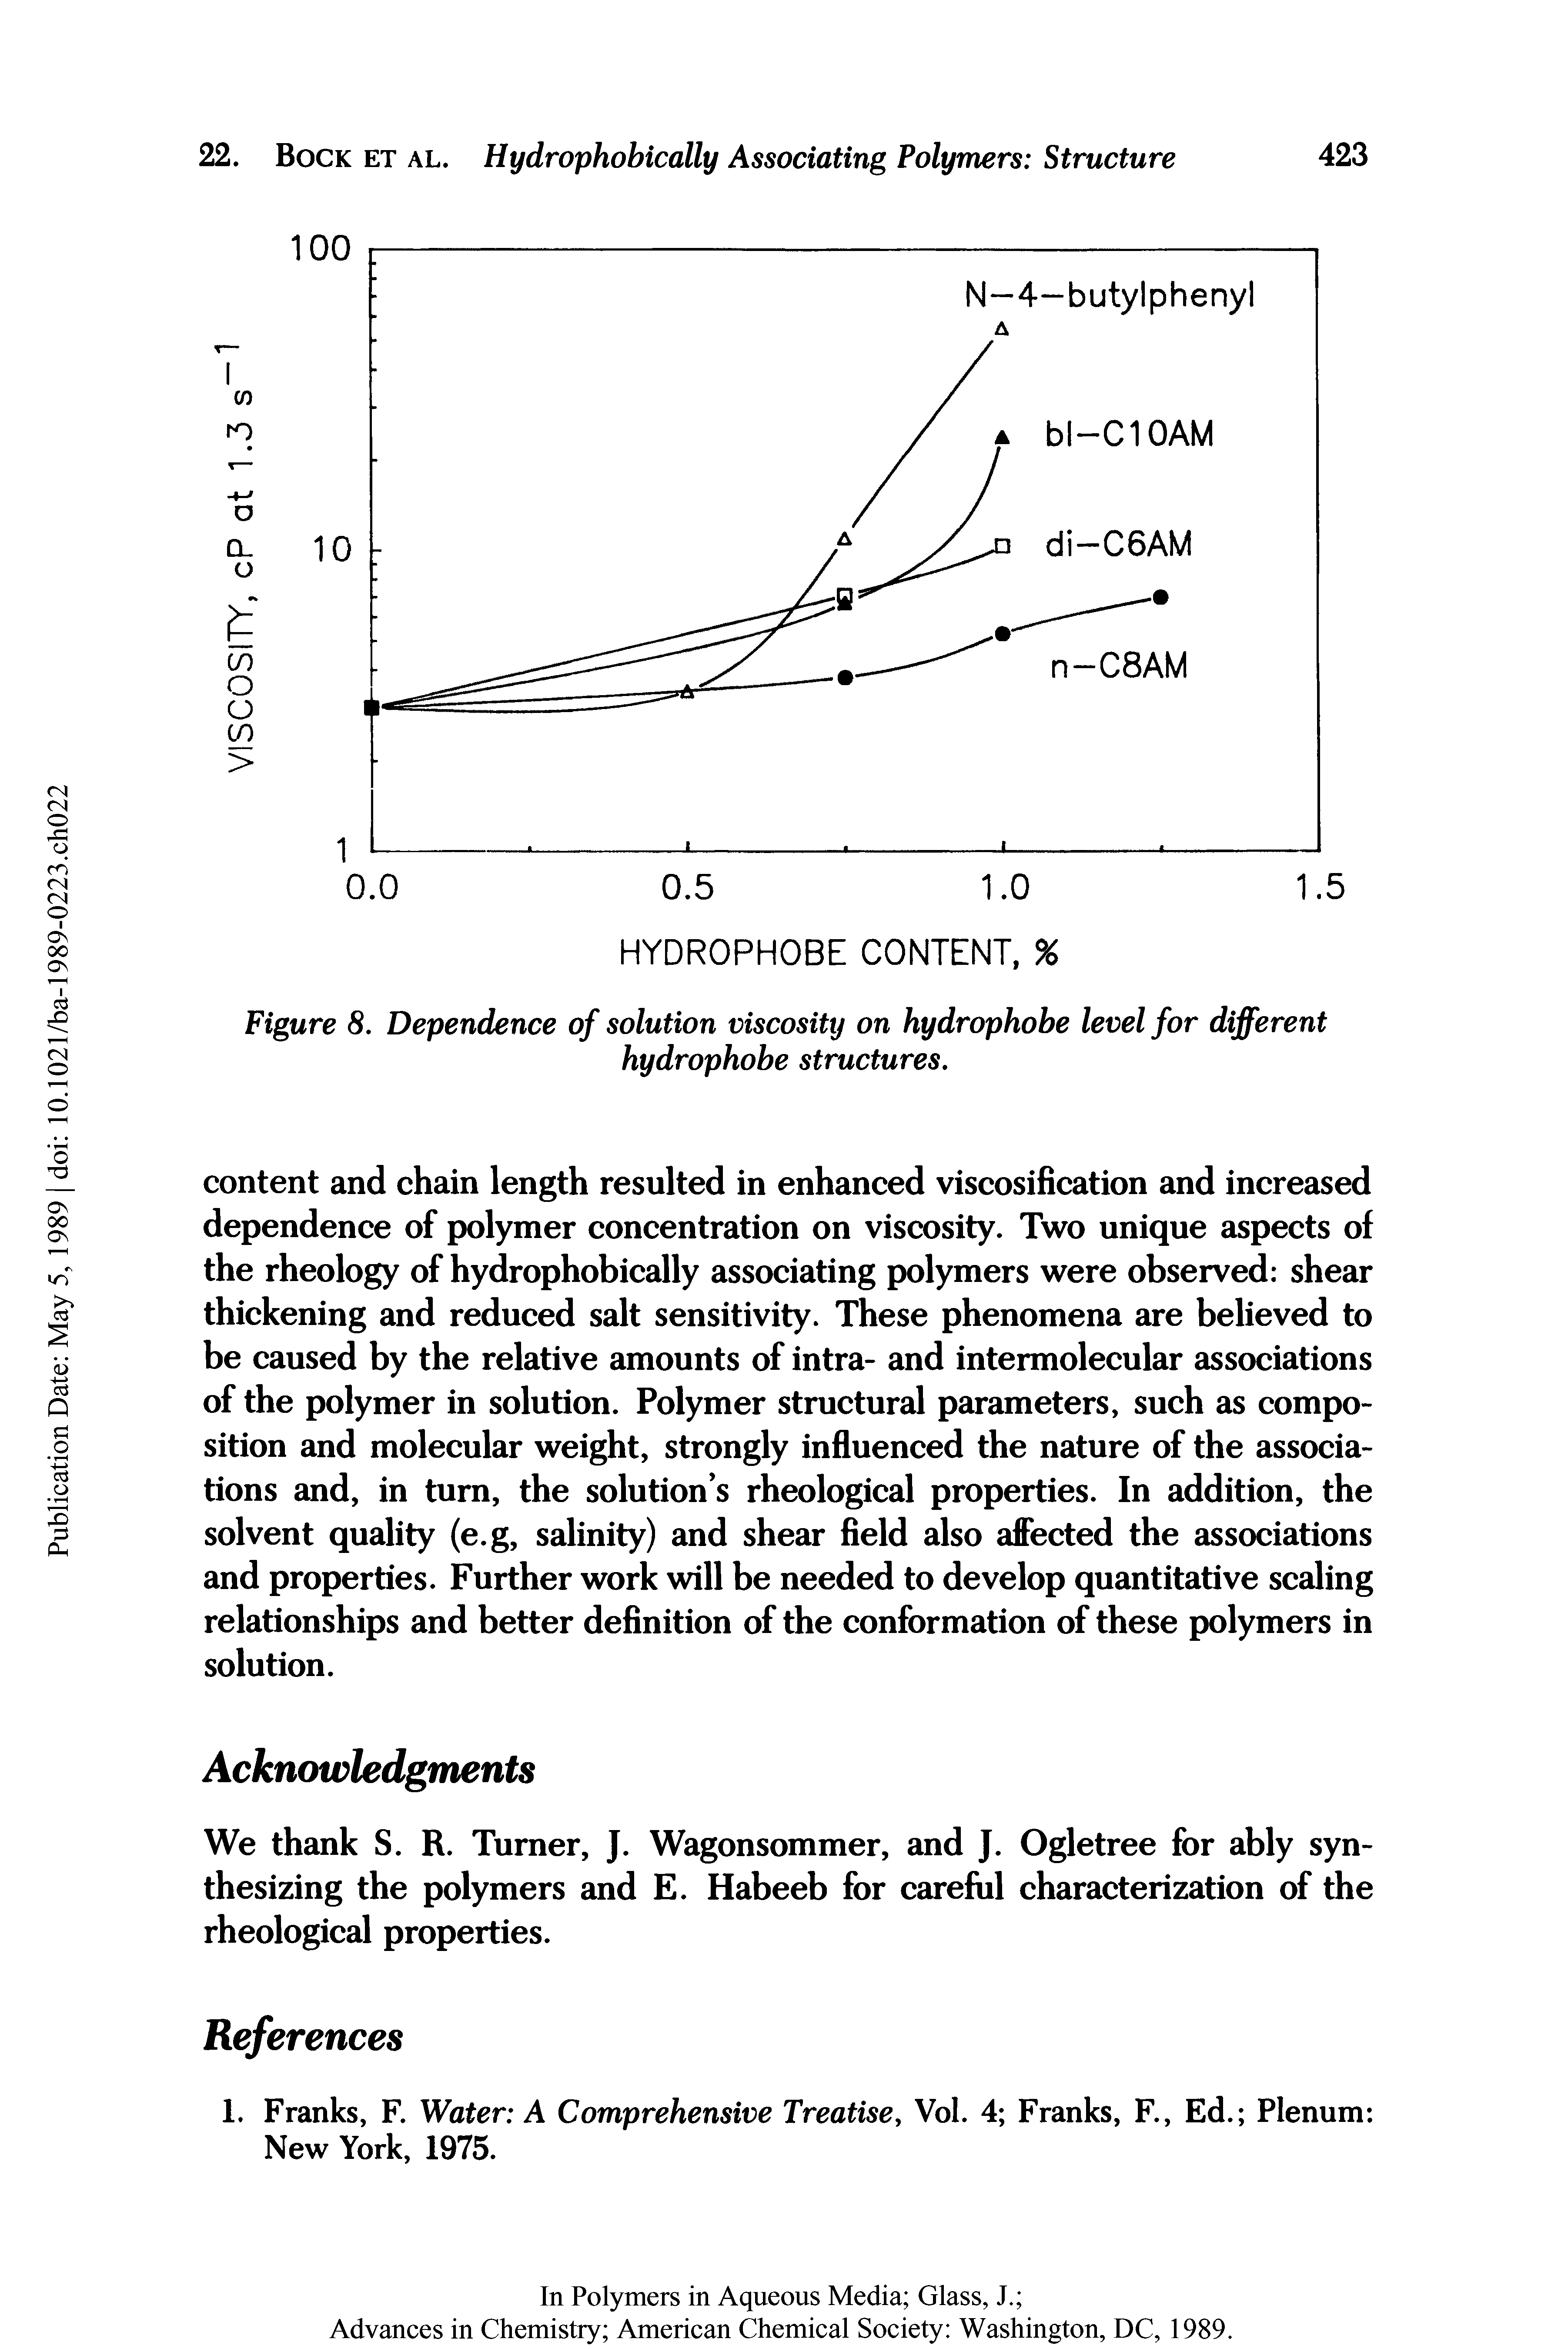 Figure 8. Dependence of solution viscosity on hydrophobe level for different hydrophobe structures.